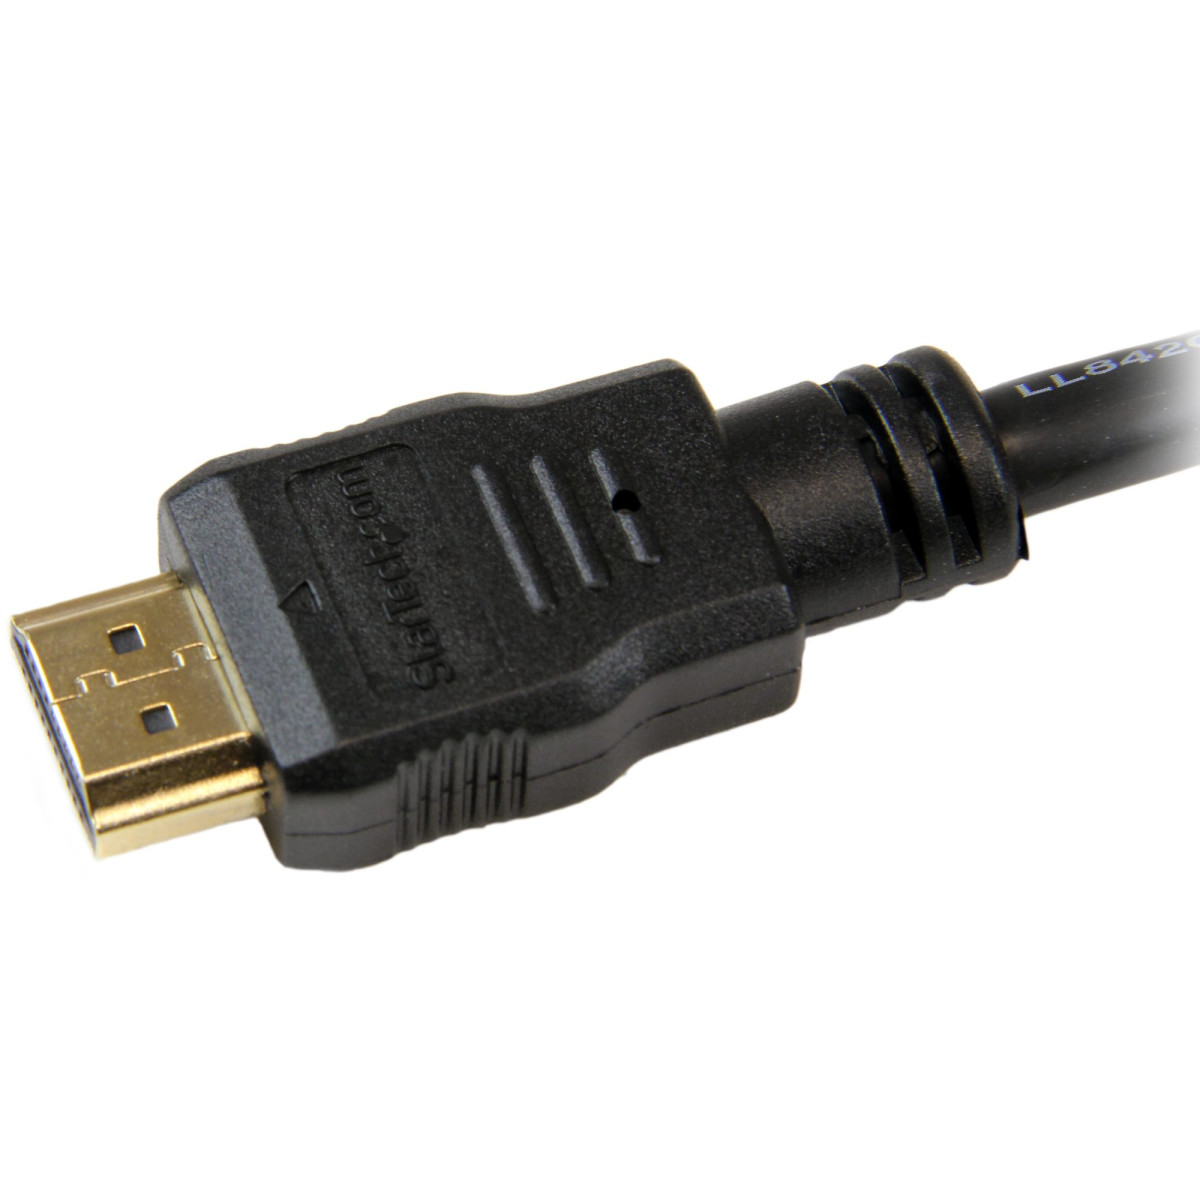 2m High Speed HDMI Cable